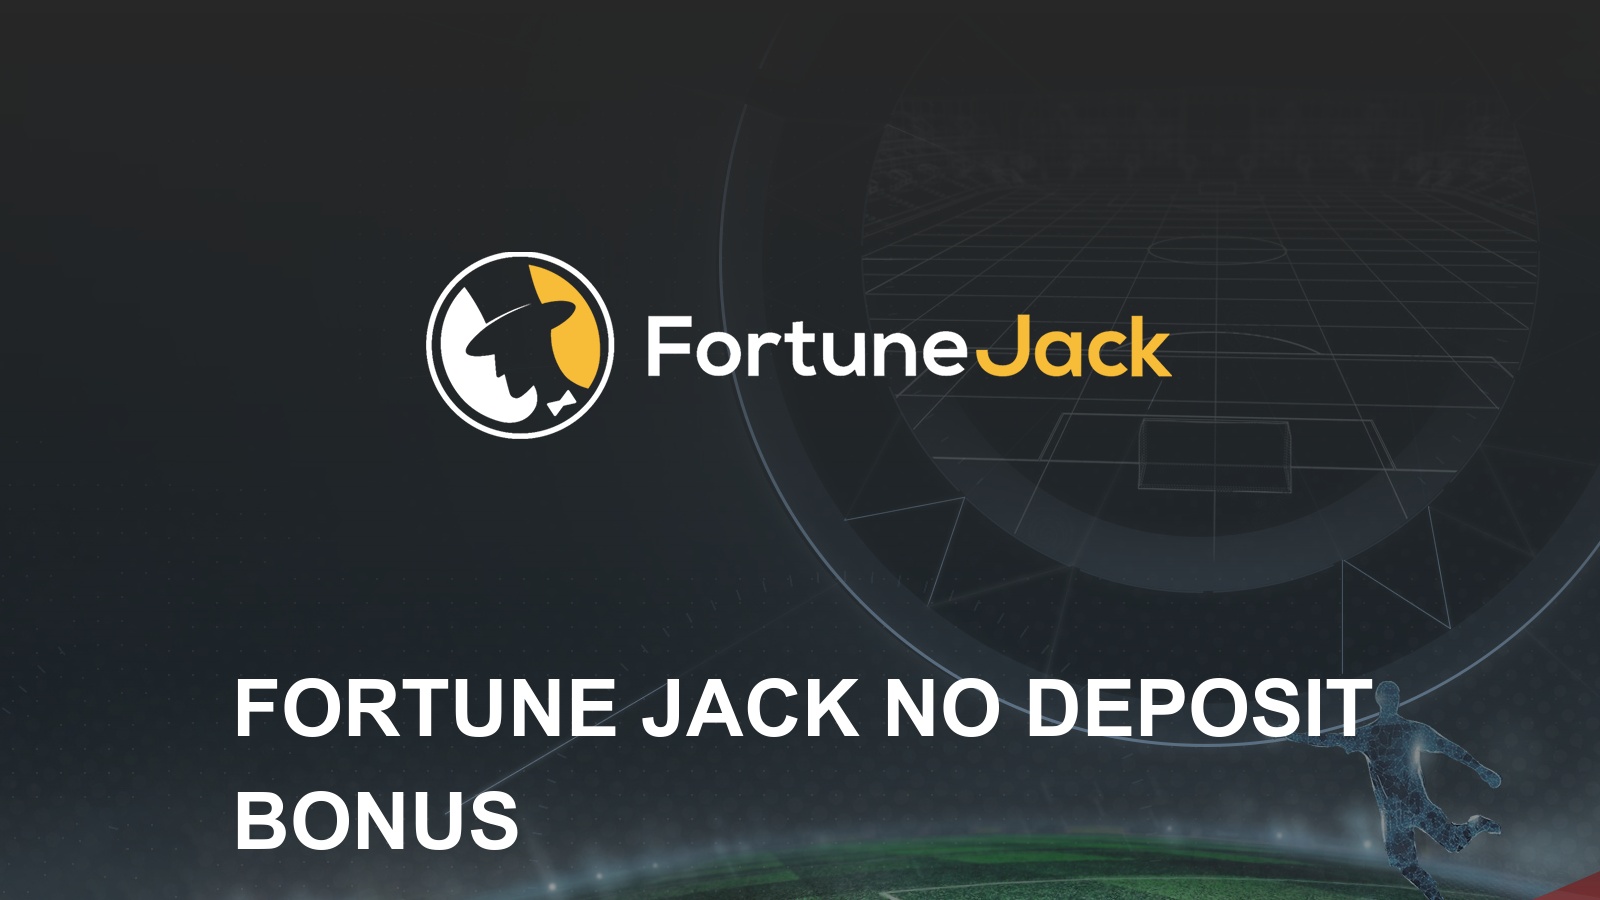 fortunejack free spins